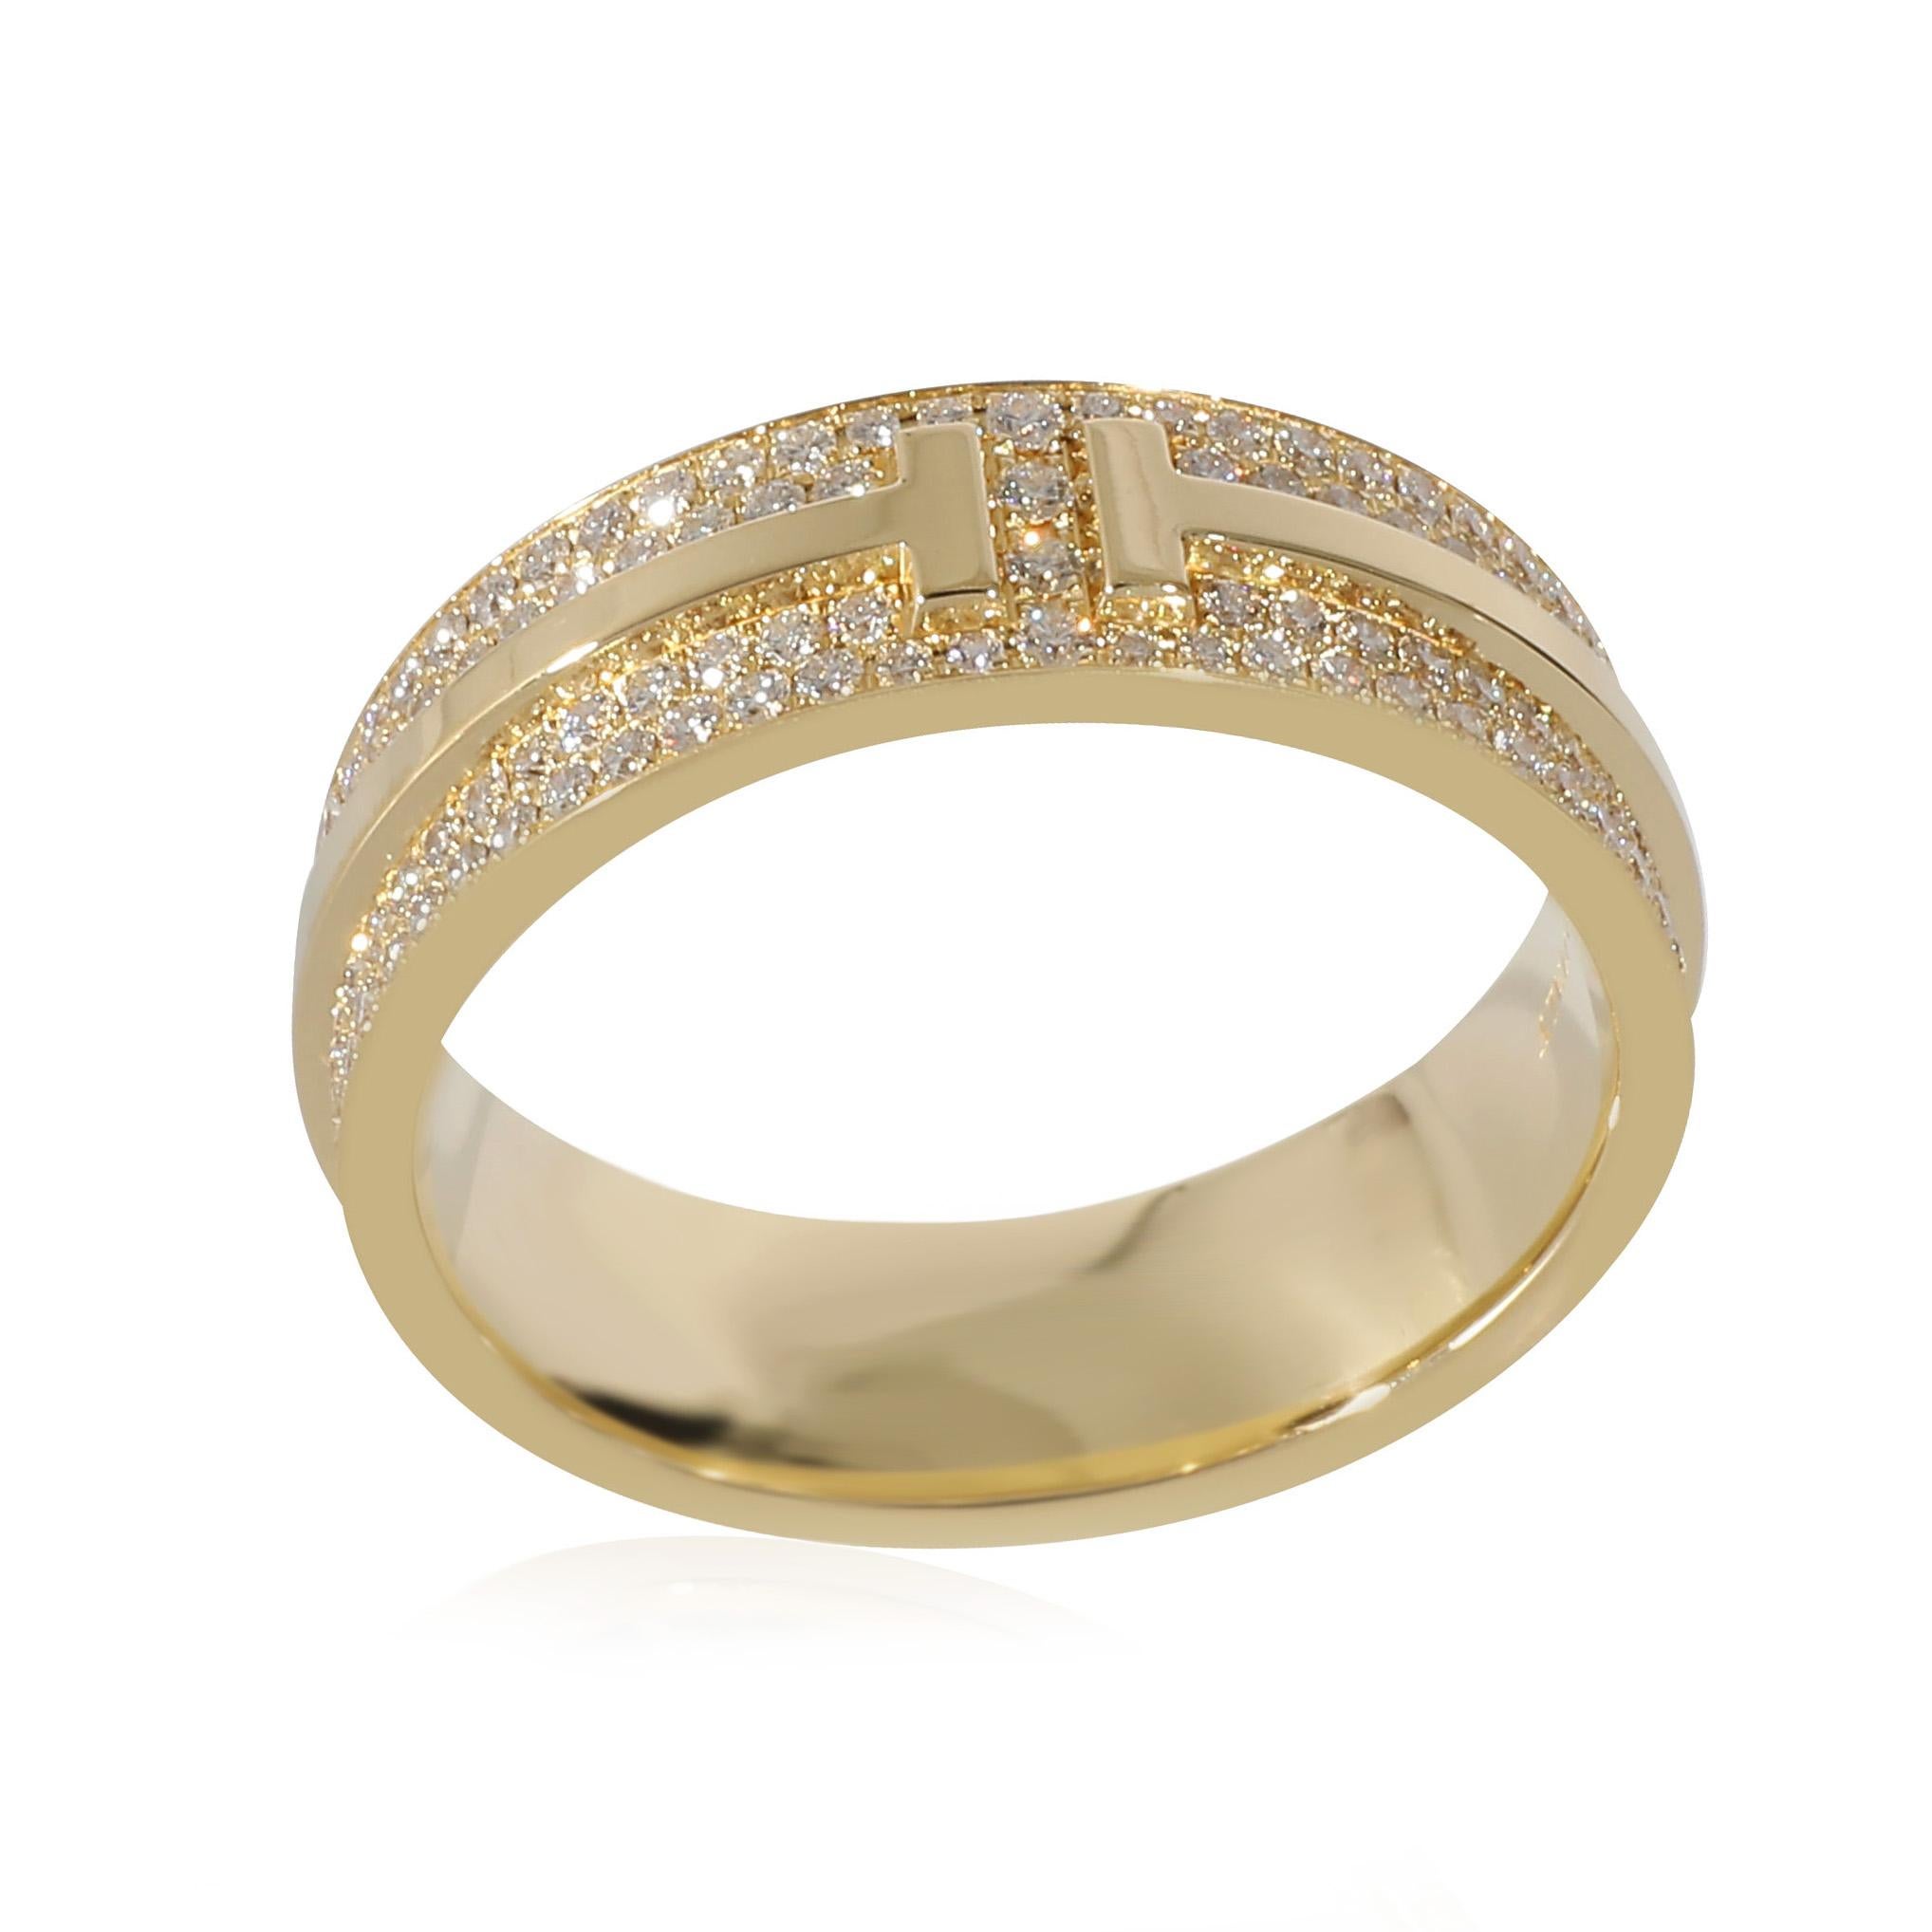 Tiffany & Co. Tiffany T Ring in 18K Yellow Gold  0.61 CTW

PRIMARY DETAILS
SKU: 134213
Listing Title: Tiffany & Co. Tiffany T Ring in 18K Yellow Gold  0.61 CTW
Condition Description: Inspired by the 'T' motif that Tiffany has been incorporating